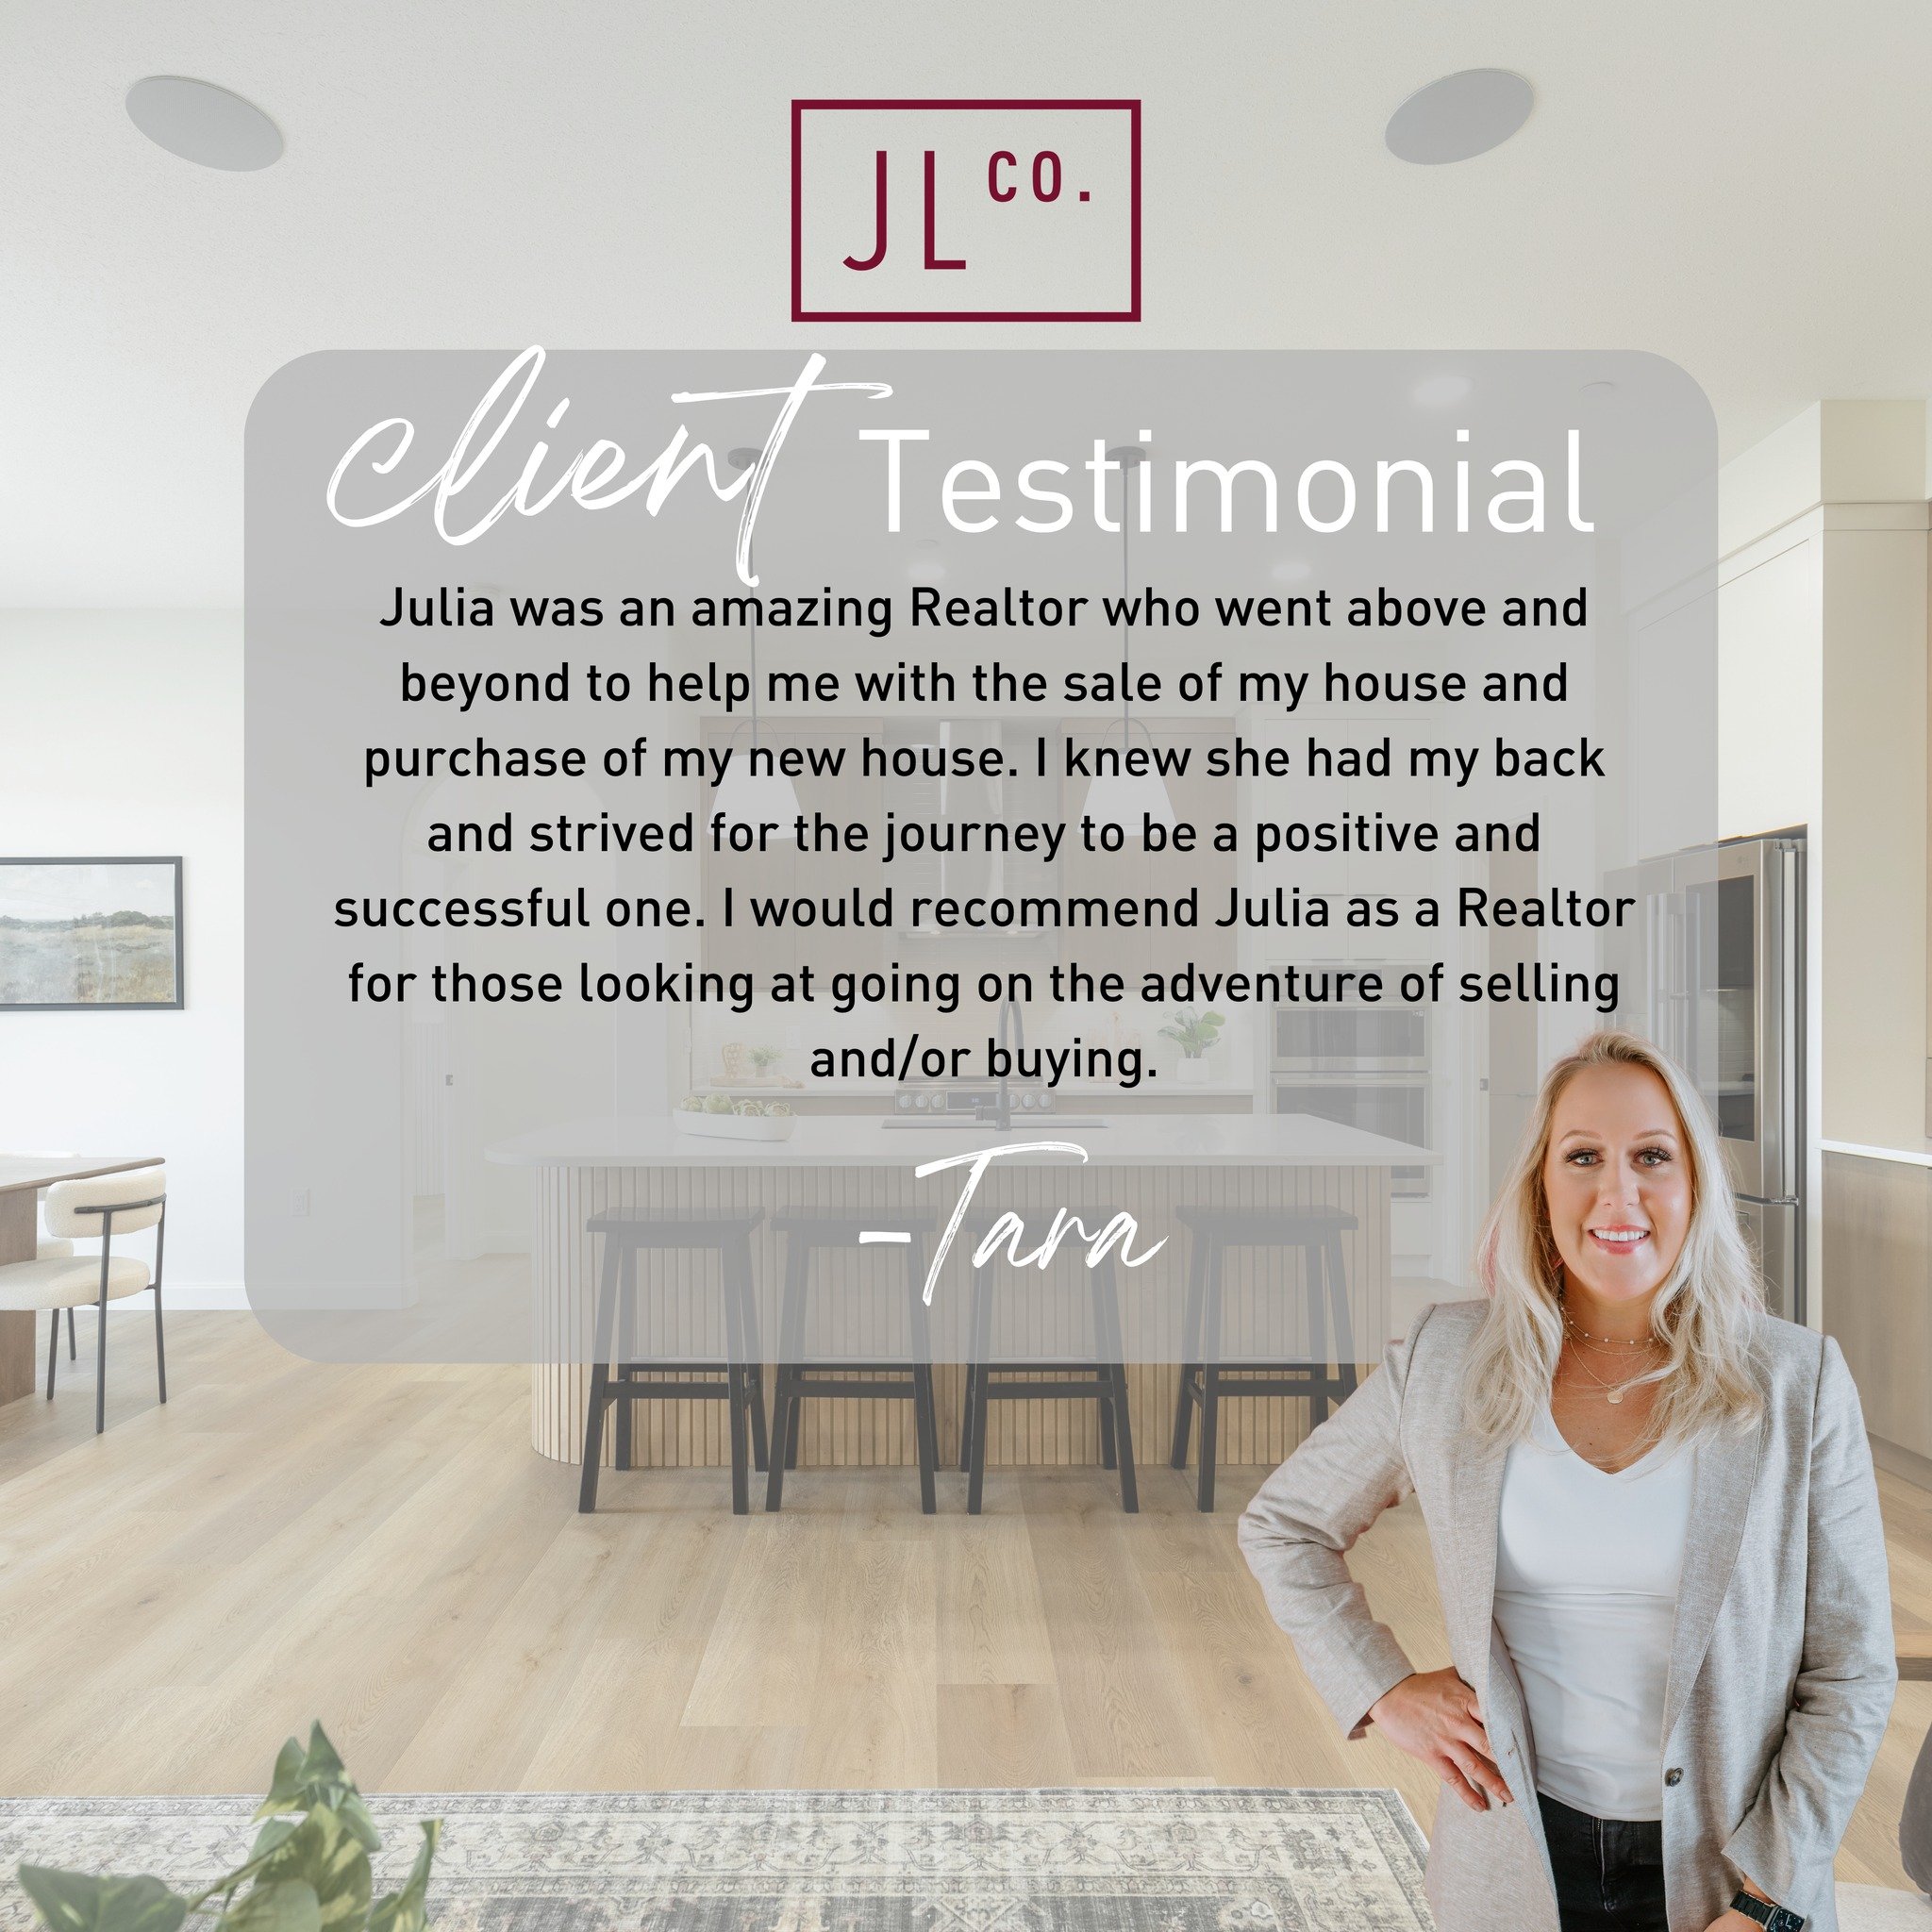 I'm incredibly grateful for the opportunity to have helped Tara navigate both buying and selling her home! 🏠💼

Thank you, Tara, for allowing me to be a part of your journey! It was a joy to work with you and help you achieve your real estate goals.